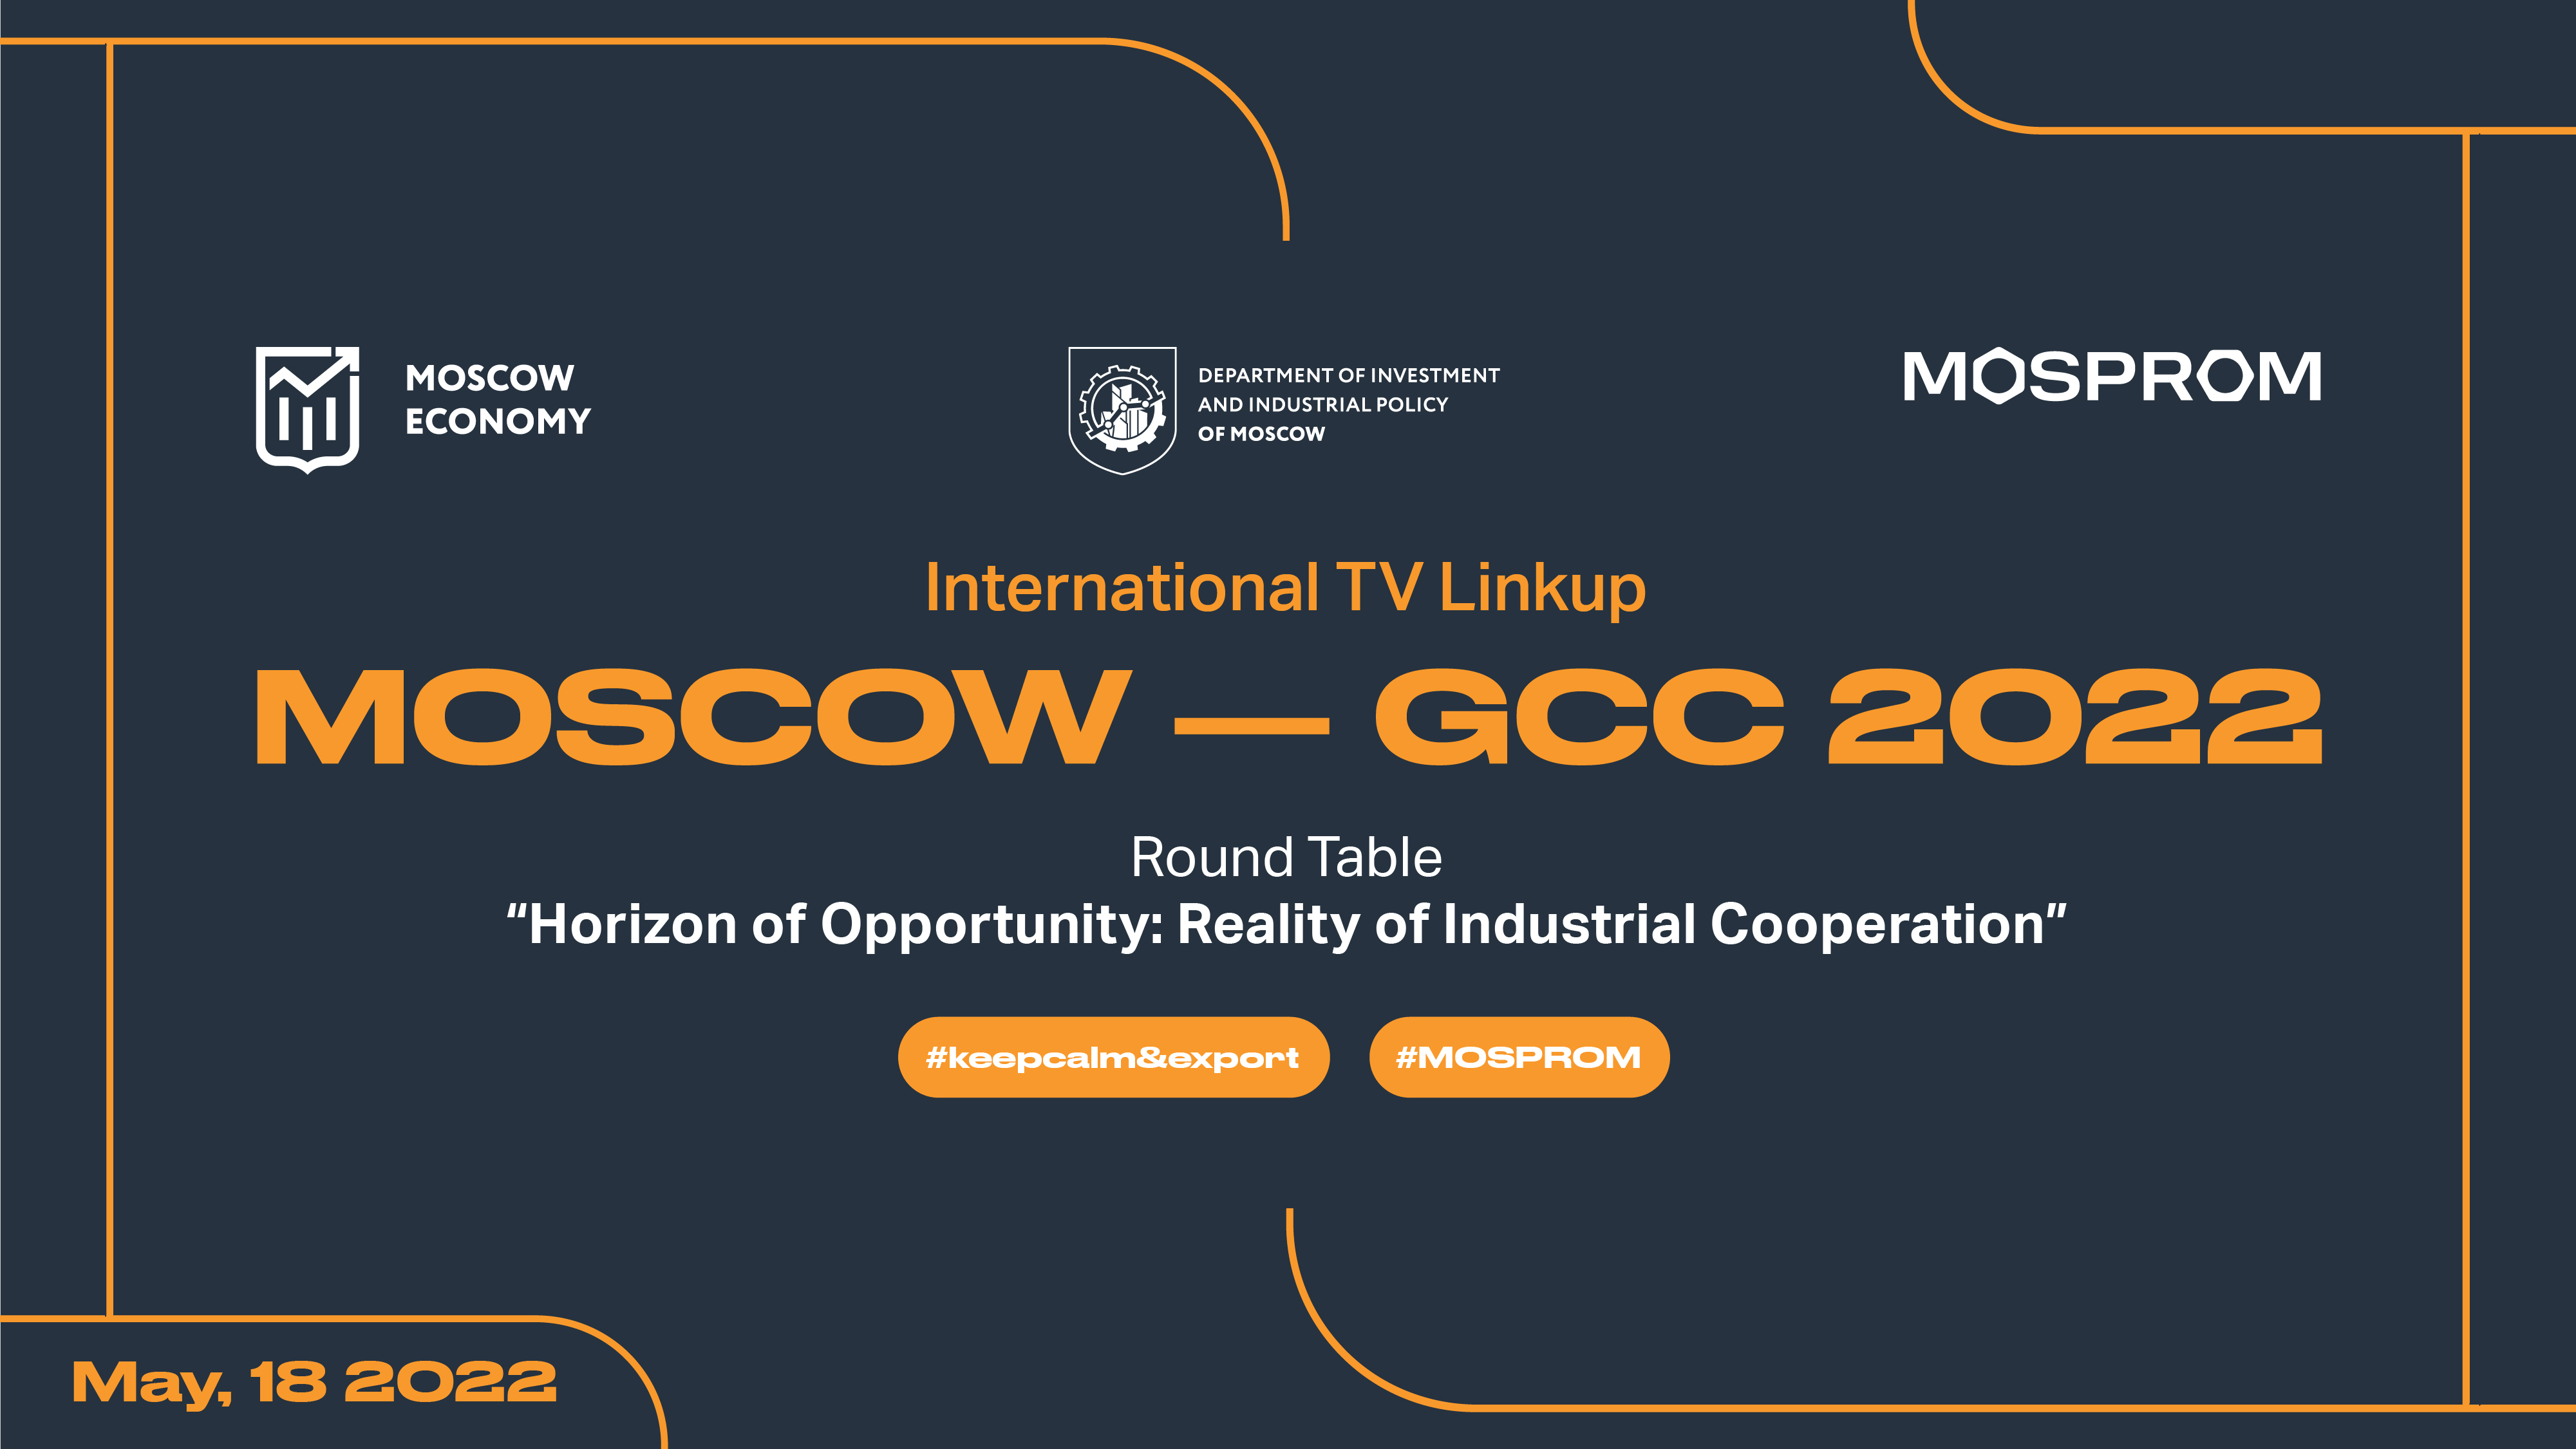 Int. TV Linkup "MOSCOW - GCC 2022". "Horizon of Opportunity: Reality of Industrial Cooperation"